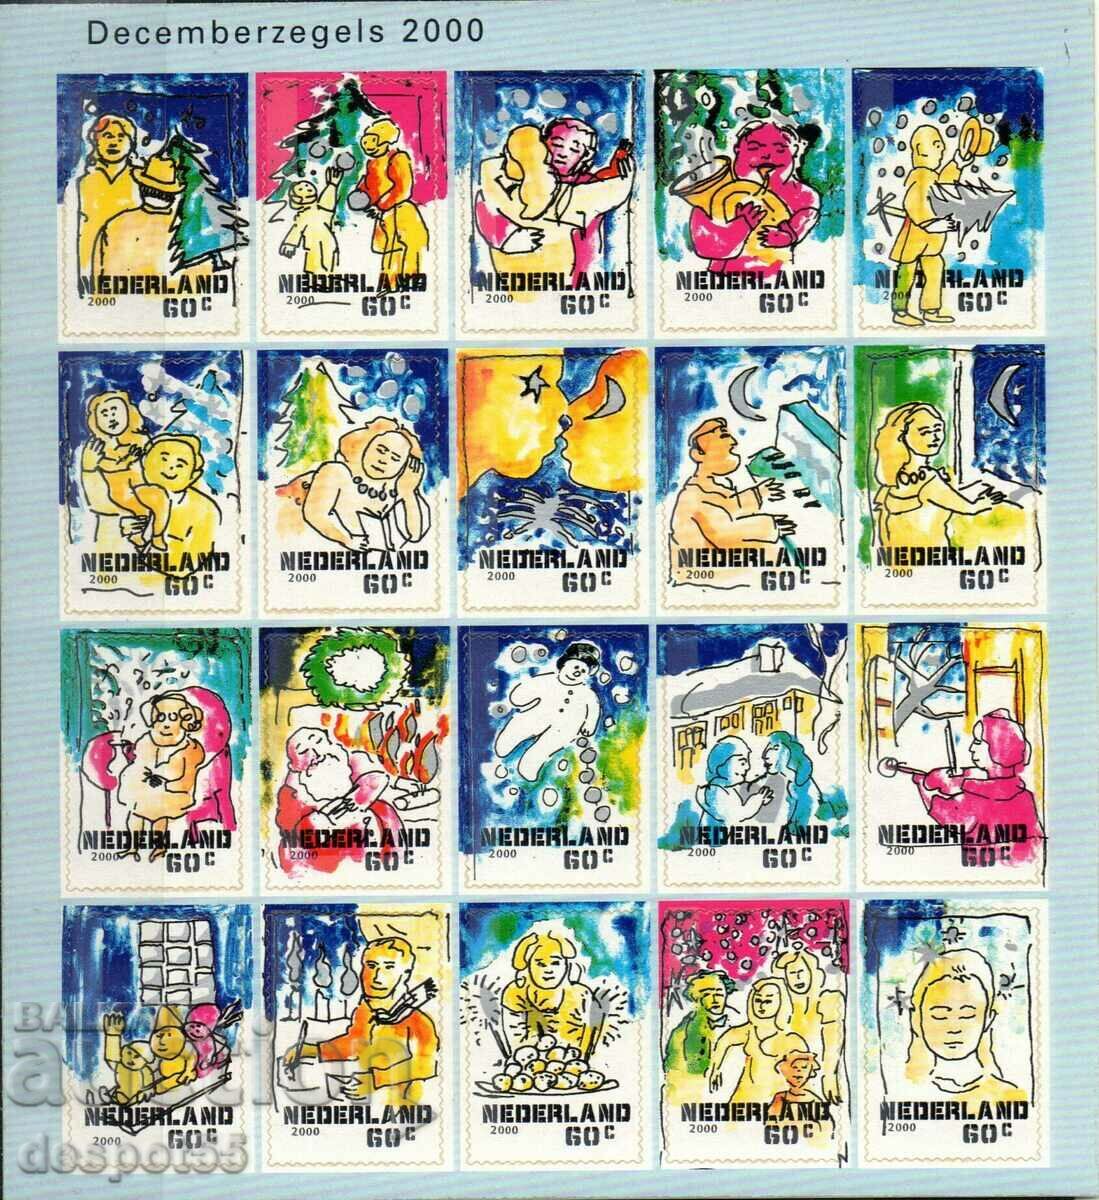 2000. The Netherlands. December stamps - Self-adhesive. Block.